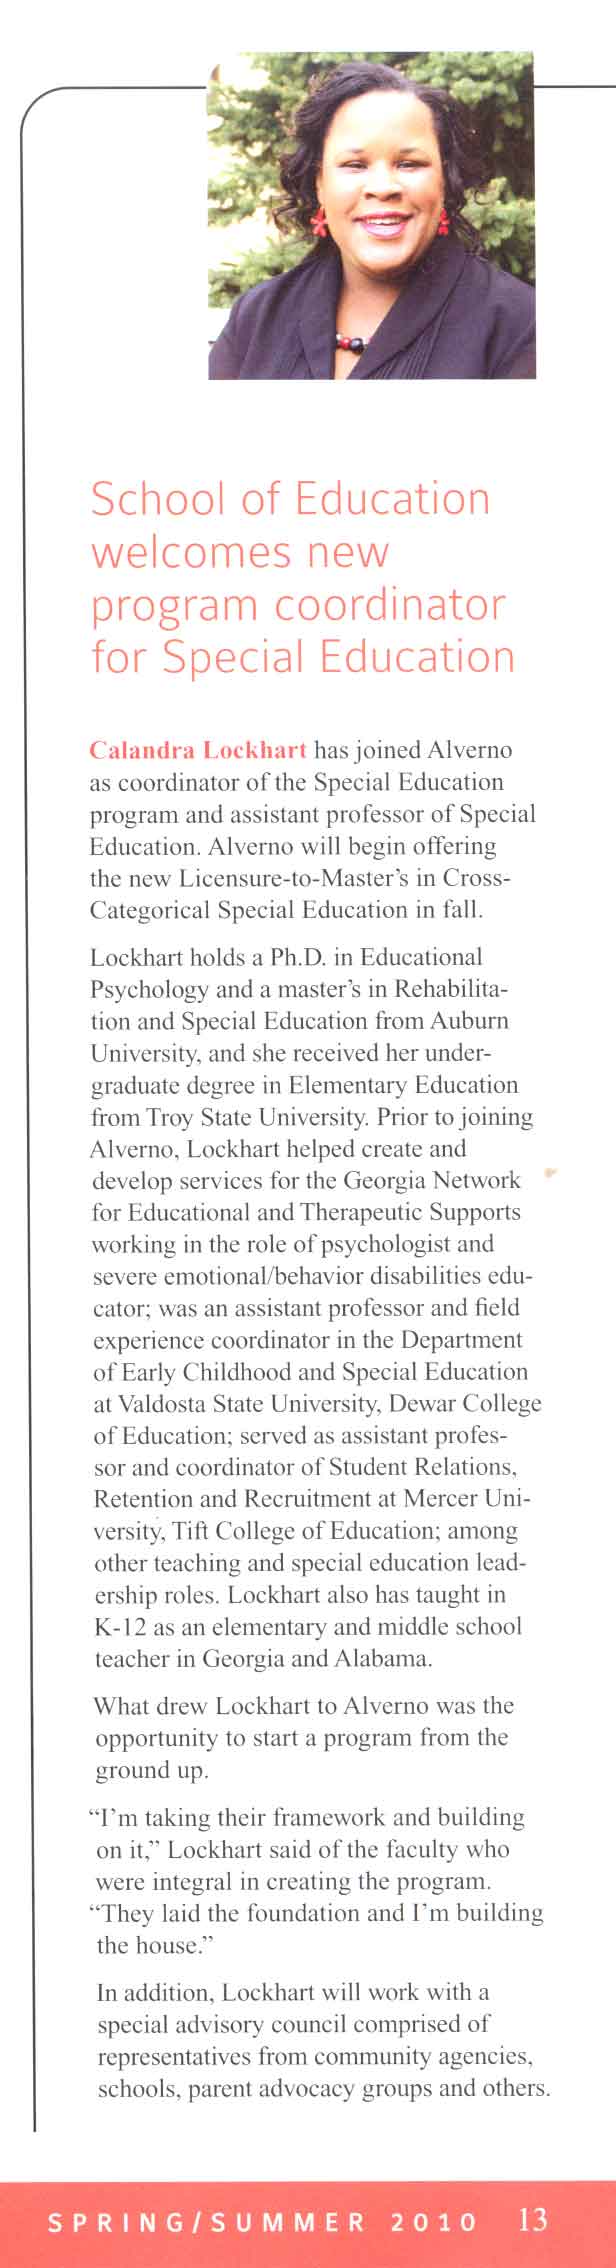 Article about Alverno's Special Education Program and Calandra Lockhart